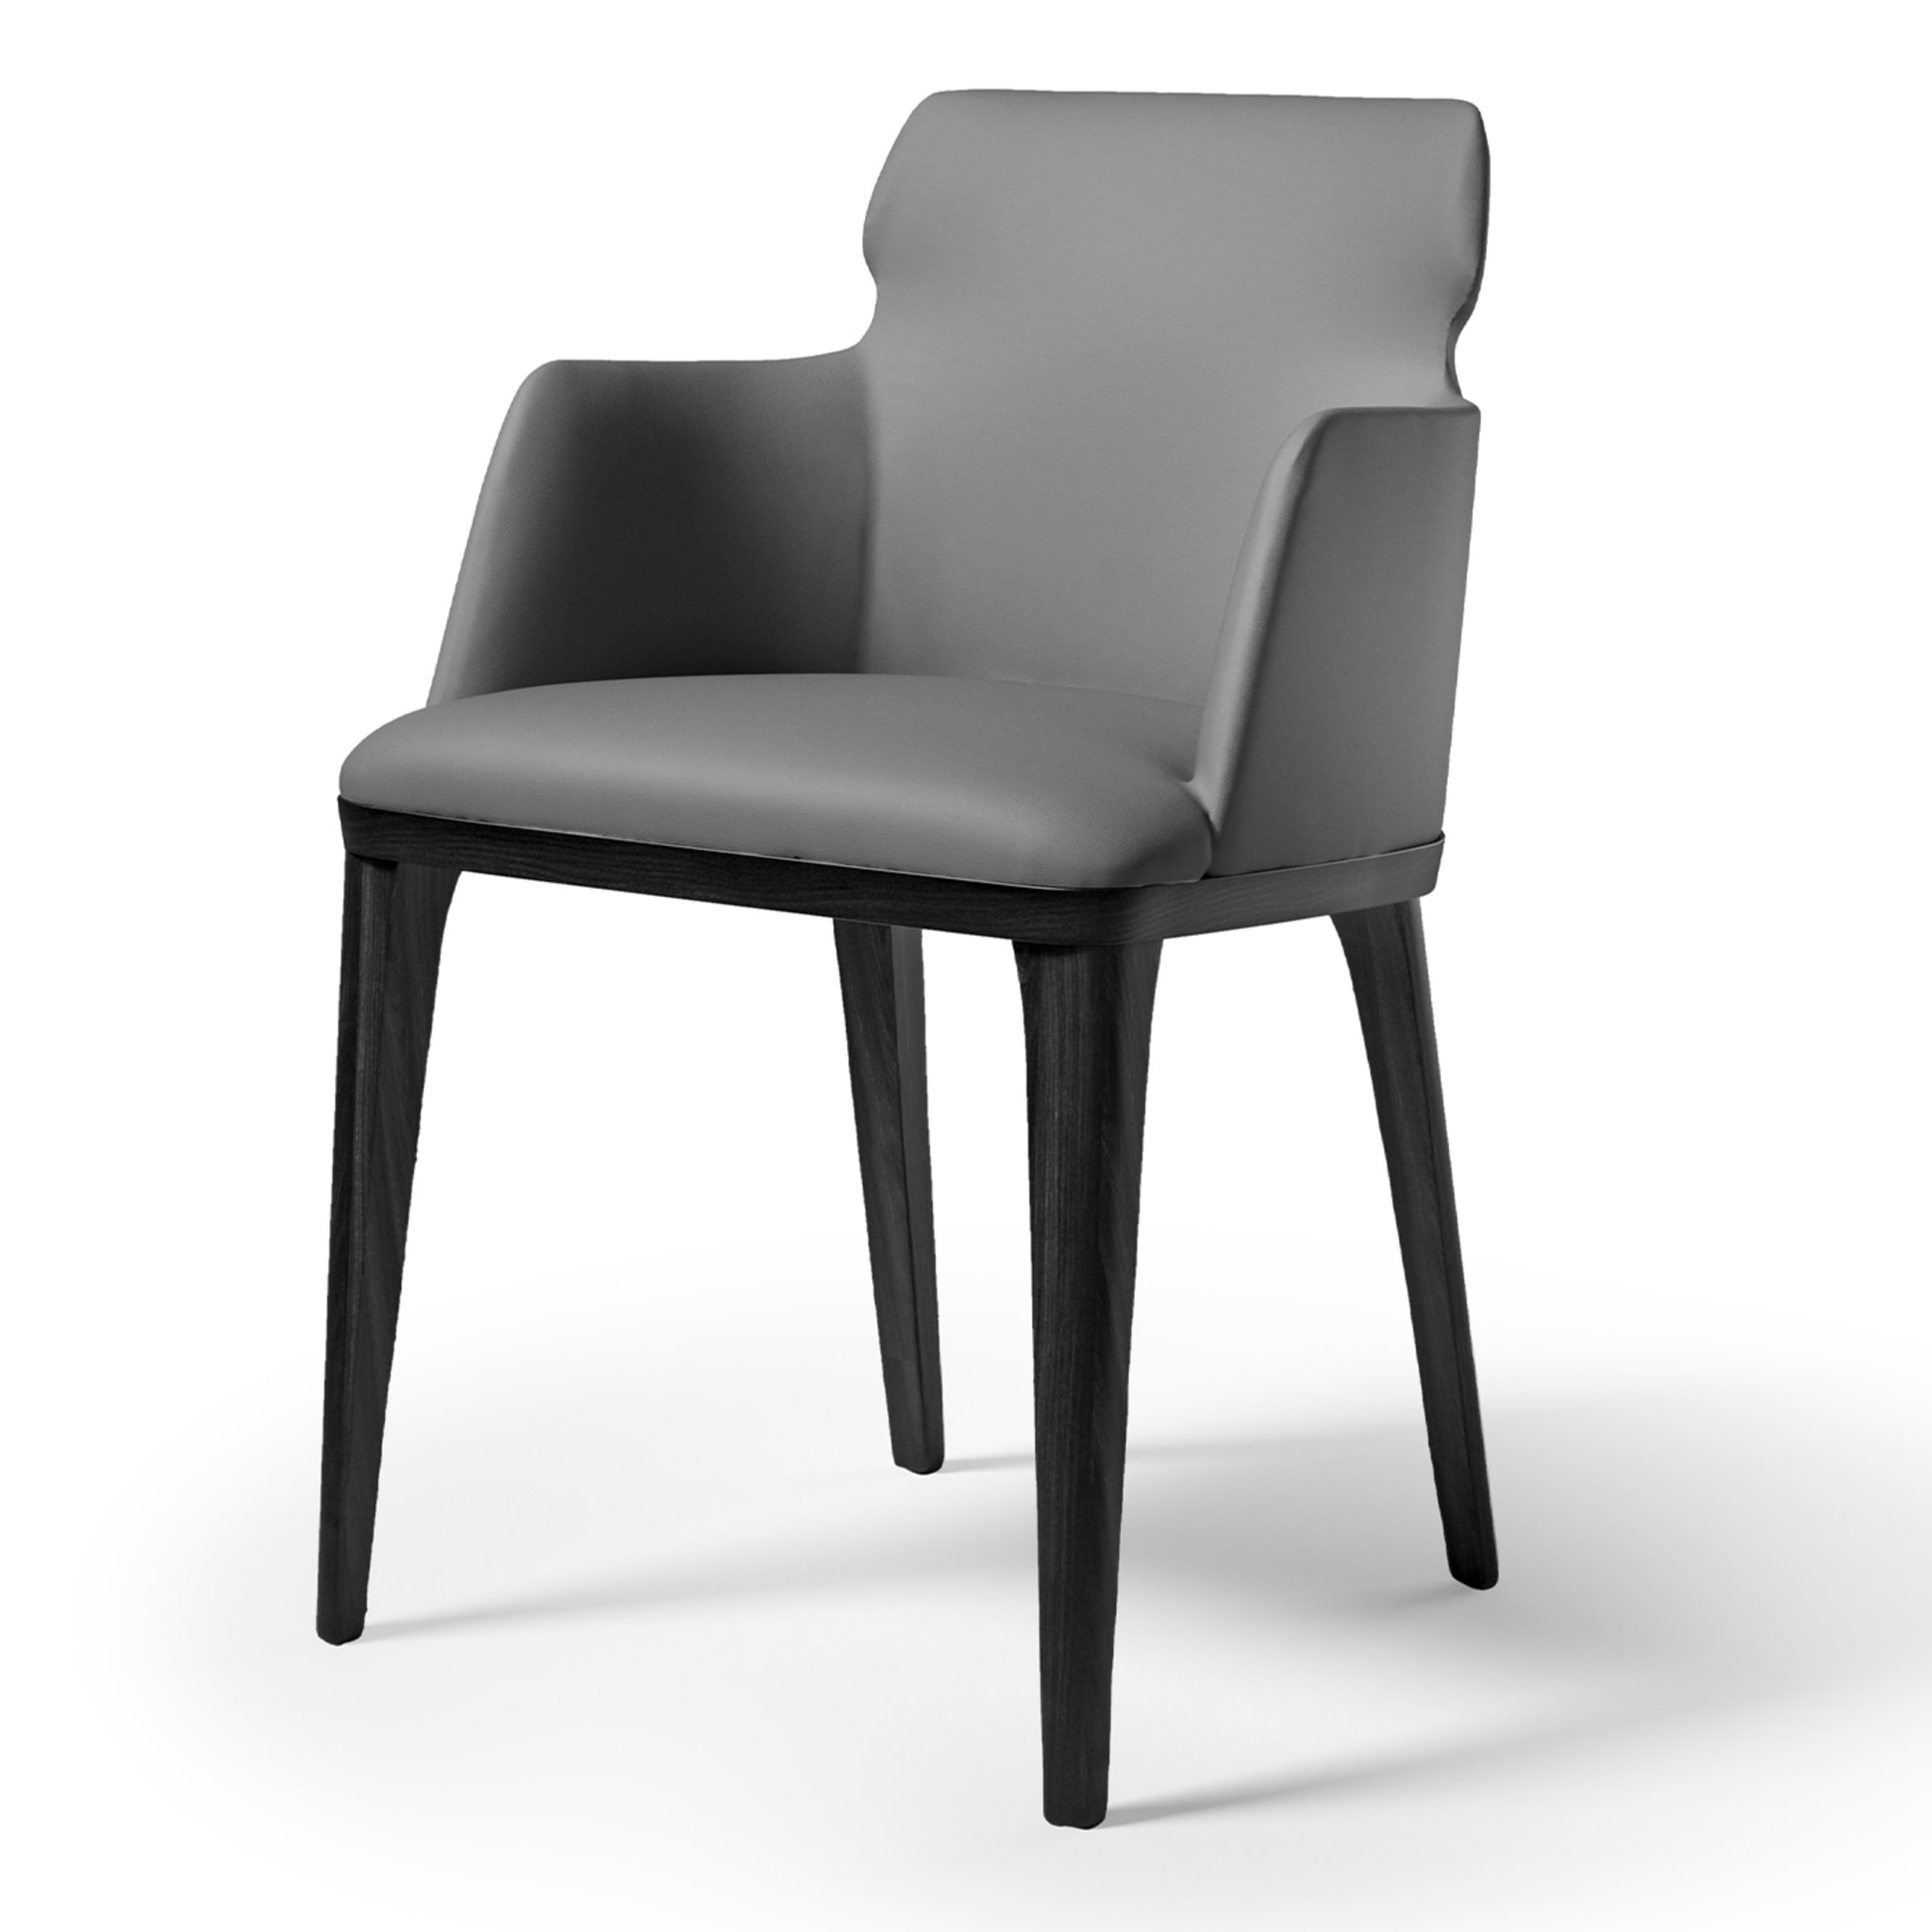 Shape Gray Leather Chair - Alternative view 1